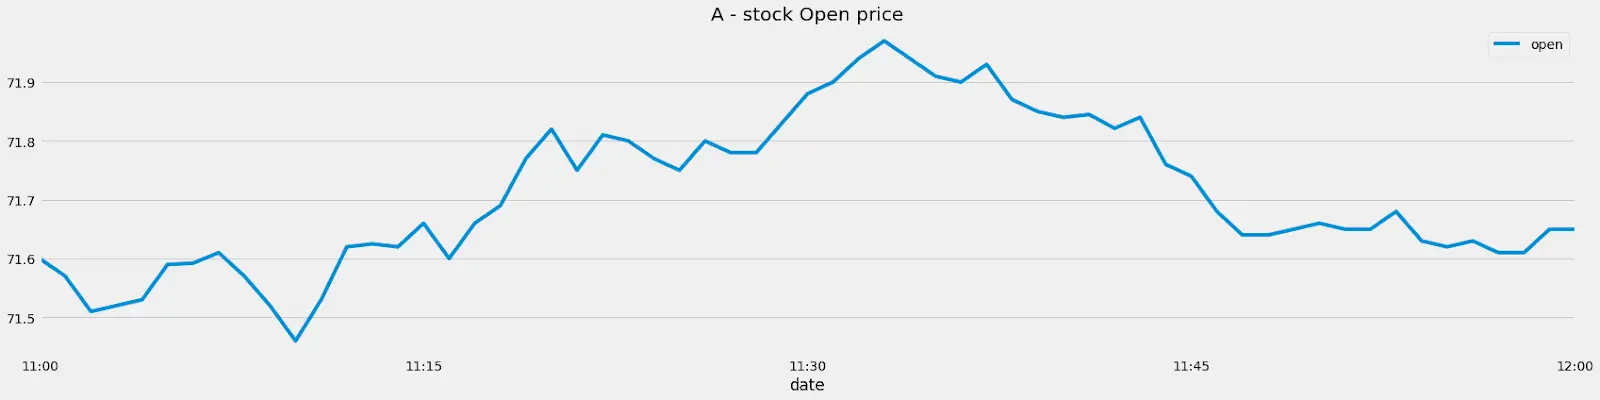 A-stock Open Price